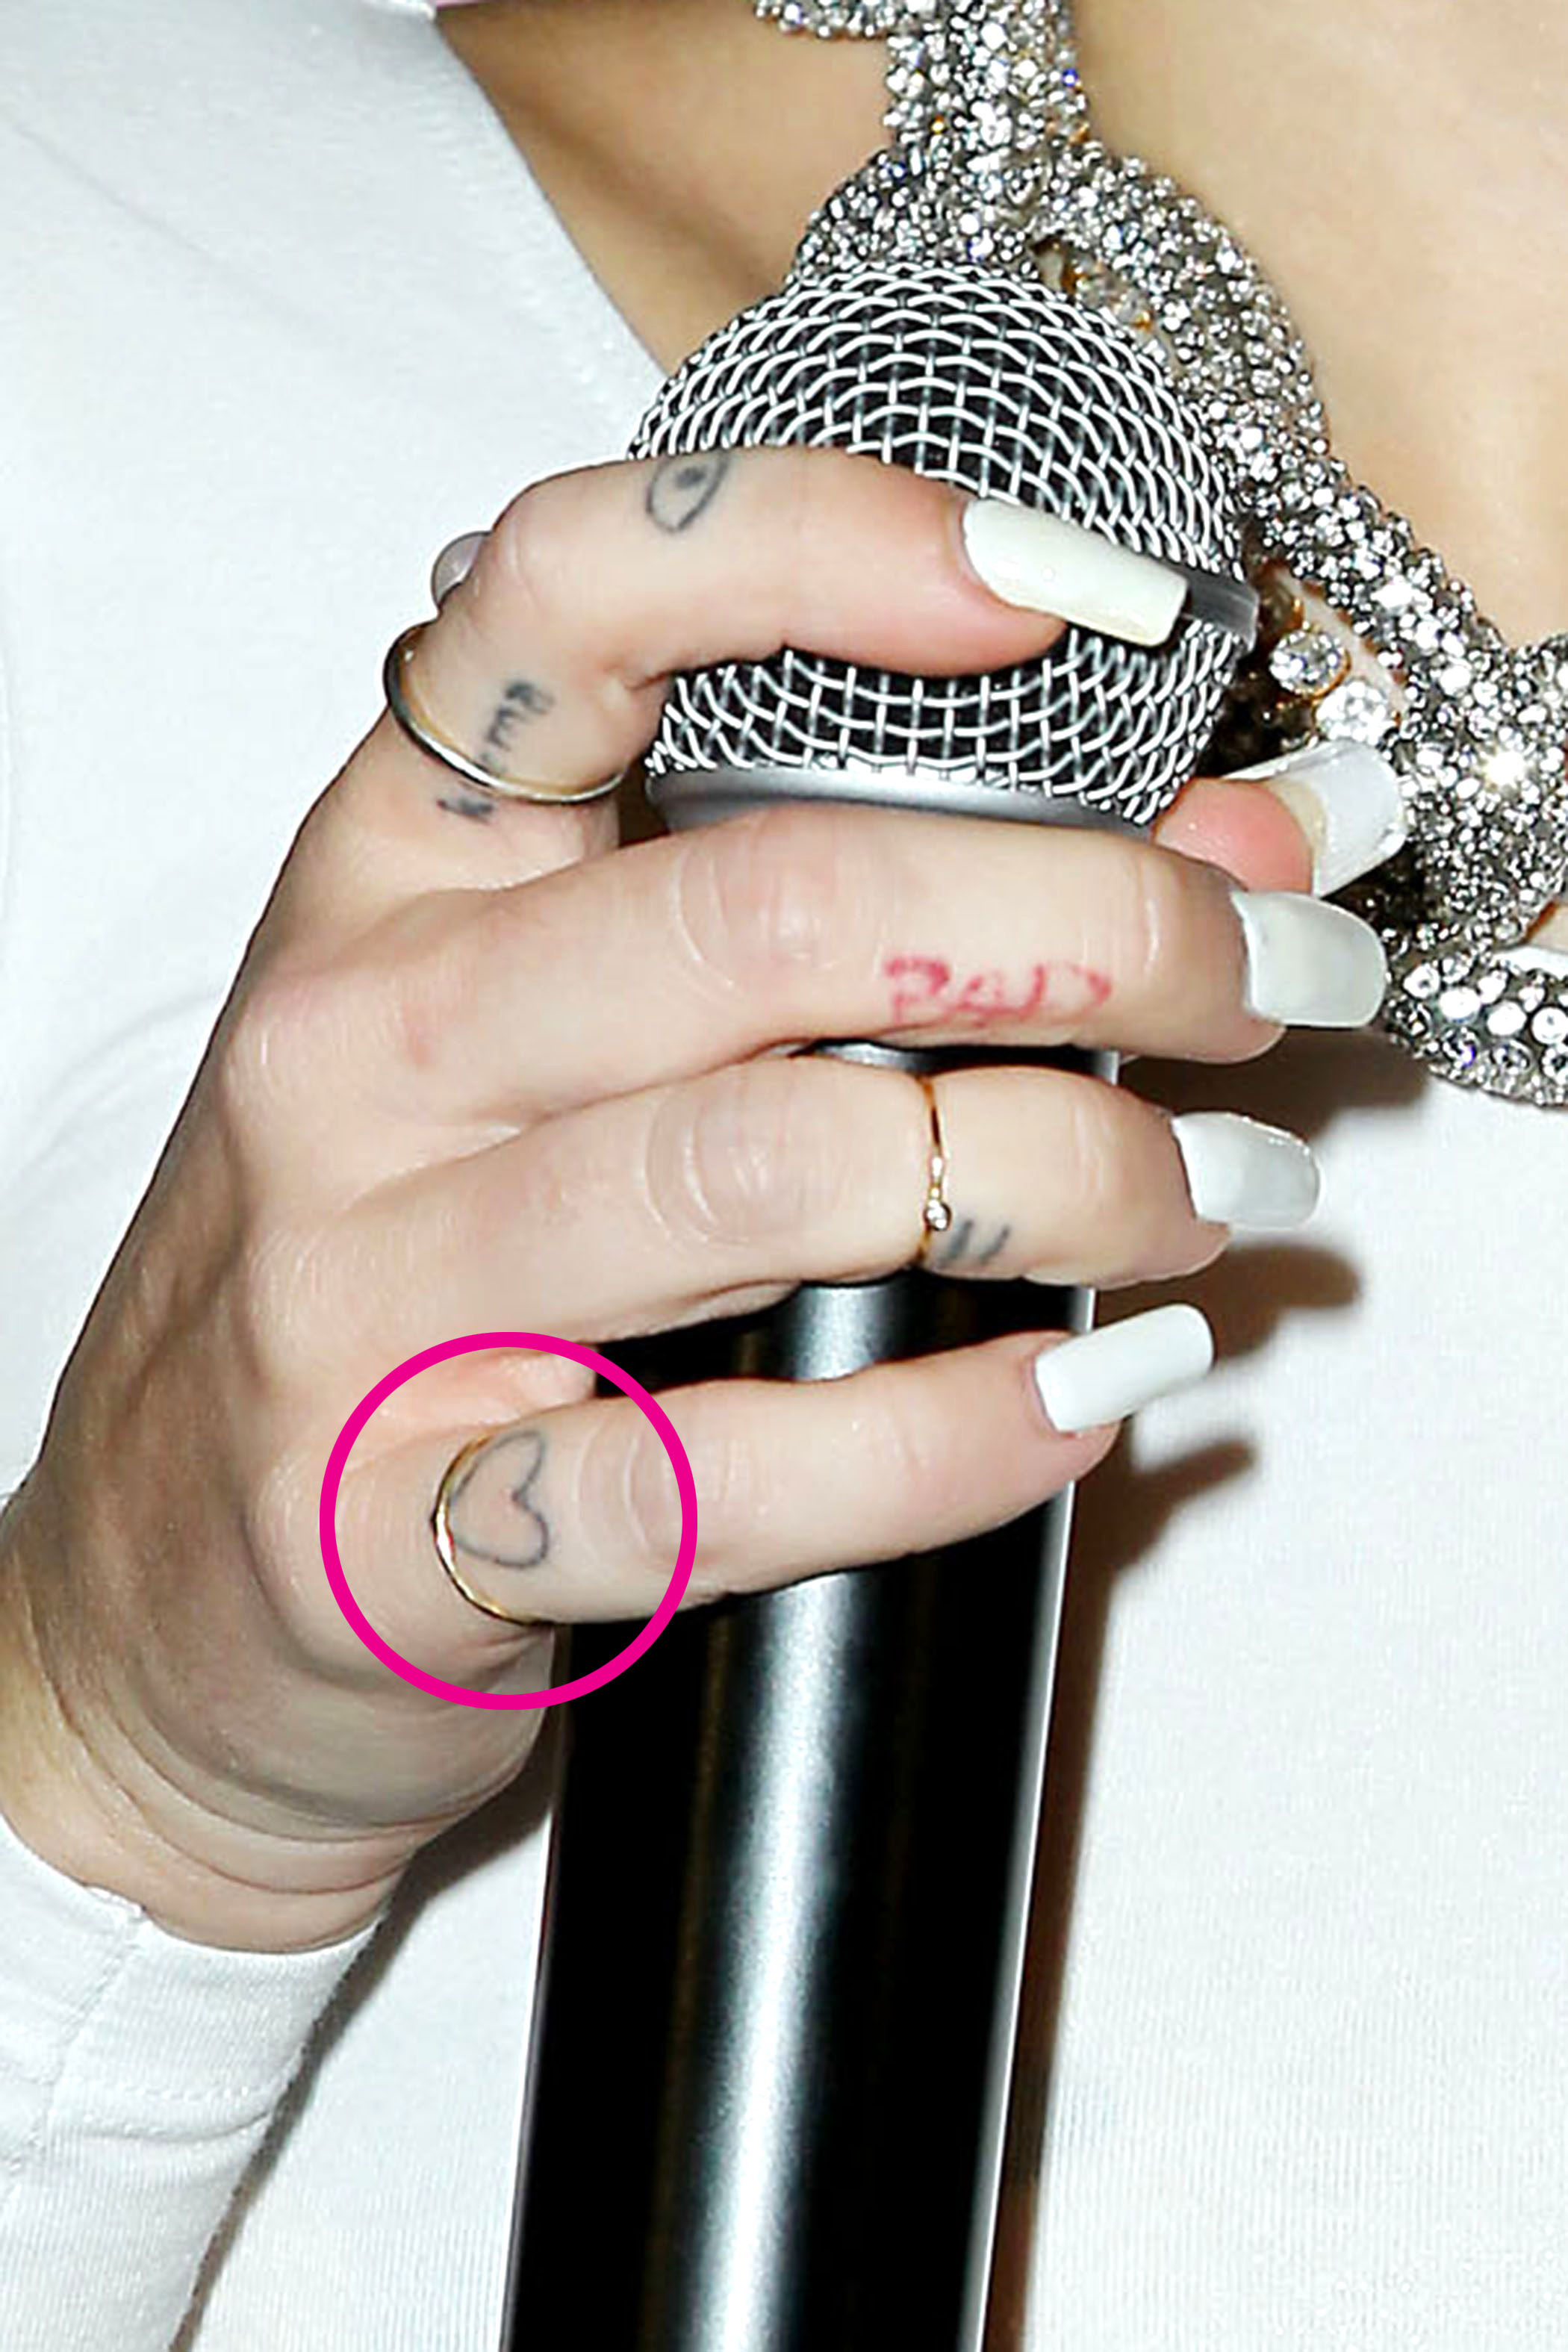 Miley Cyrus' 74 Tattoos Ink Designs, Meanings, Photos